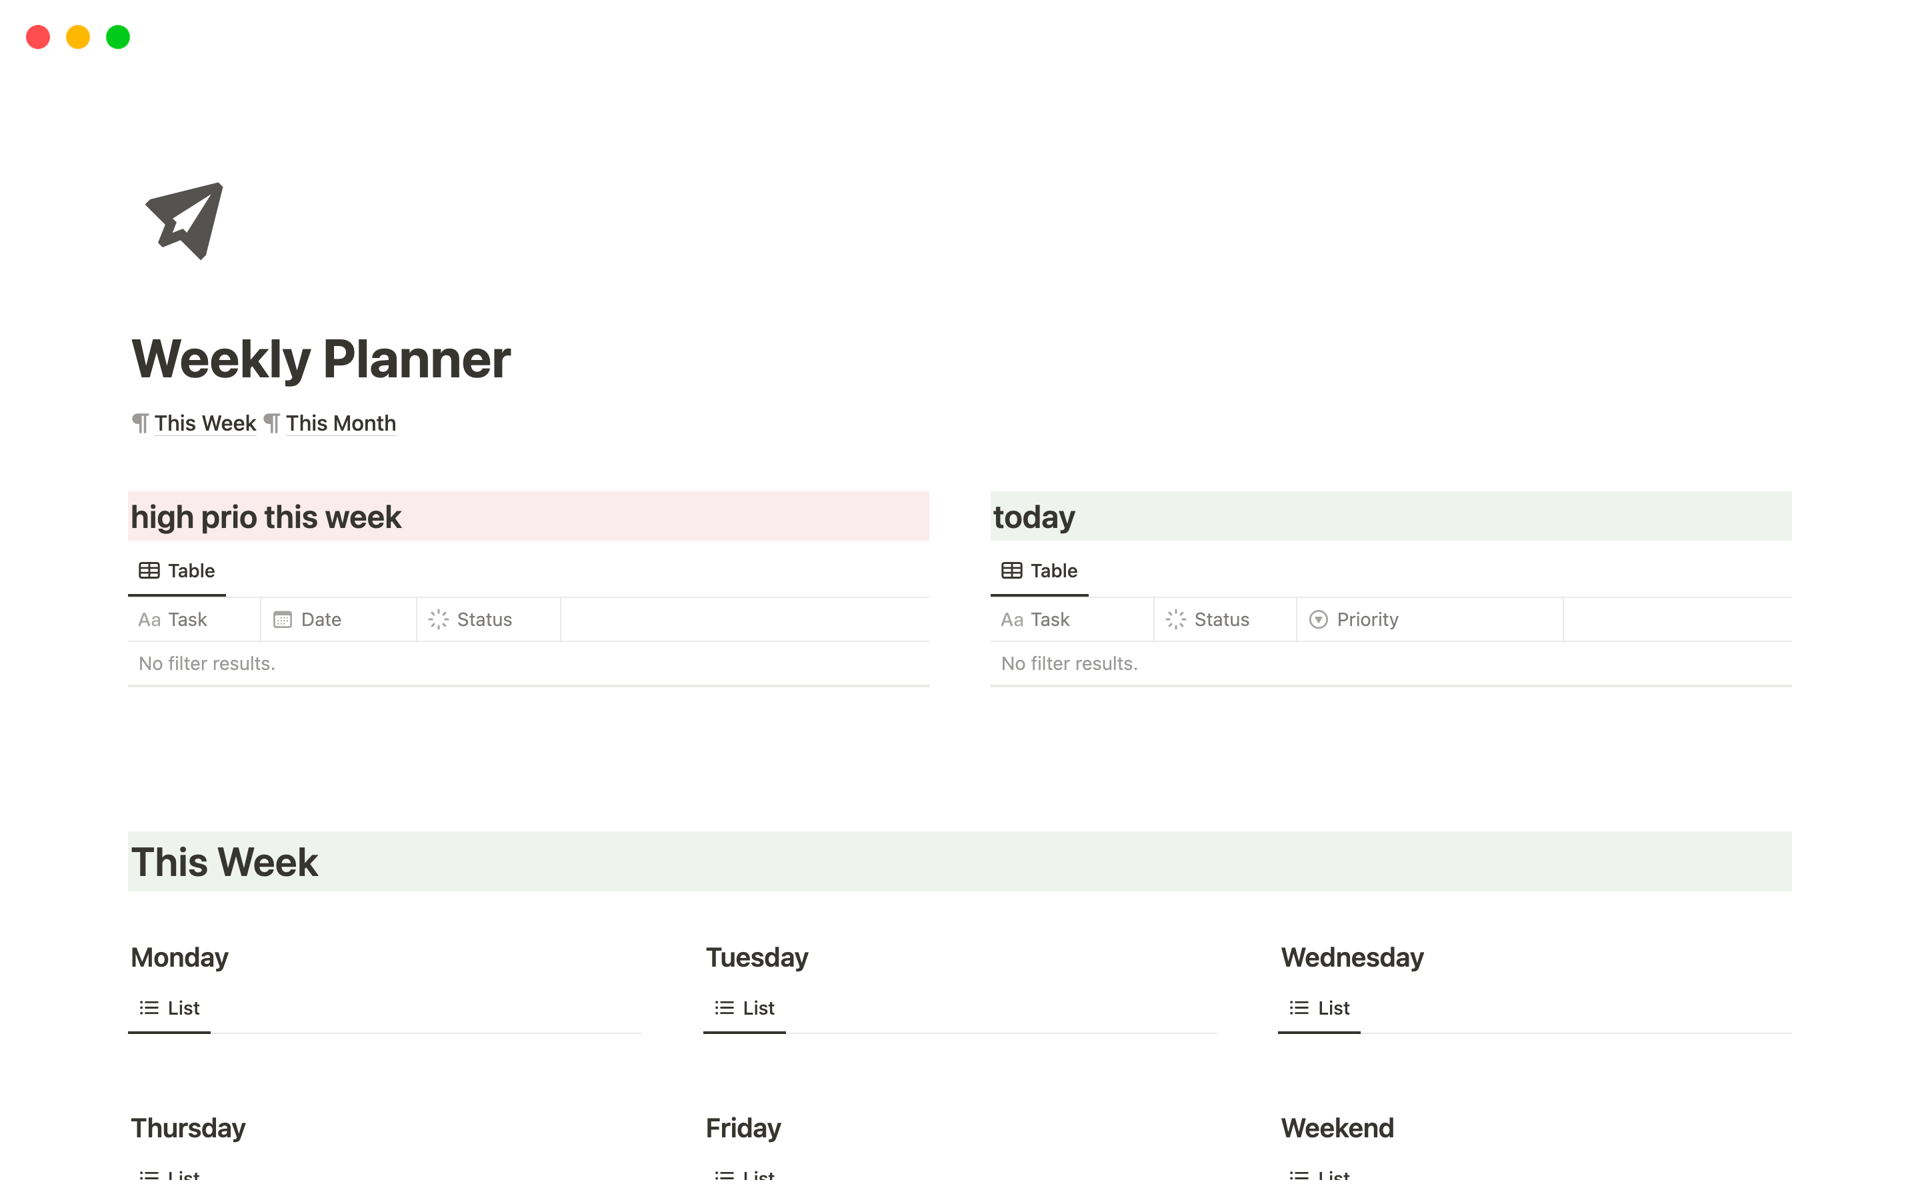 You get a simple, modern looking Weekly Planner for Notion. 
